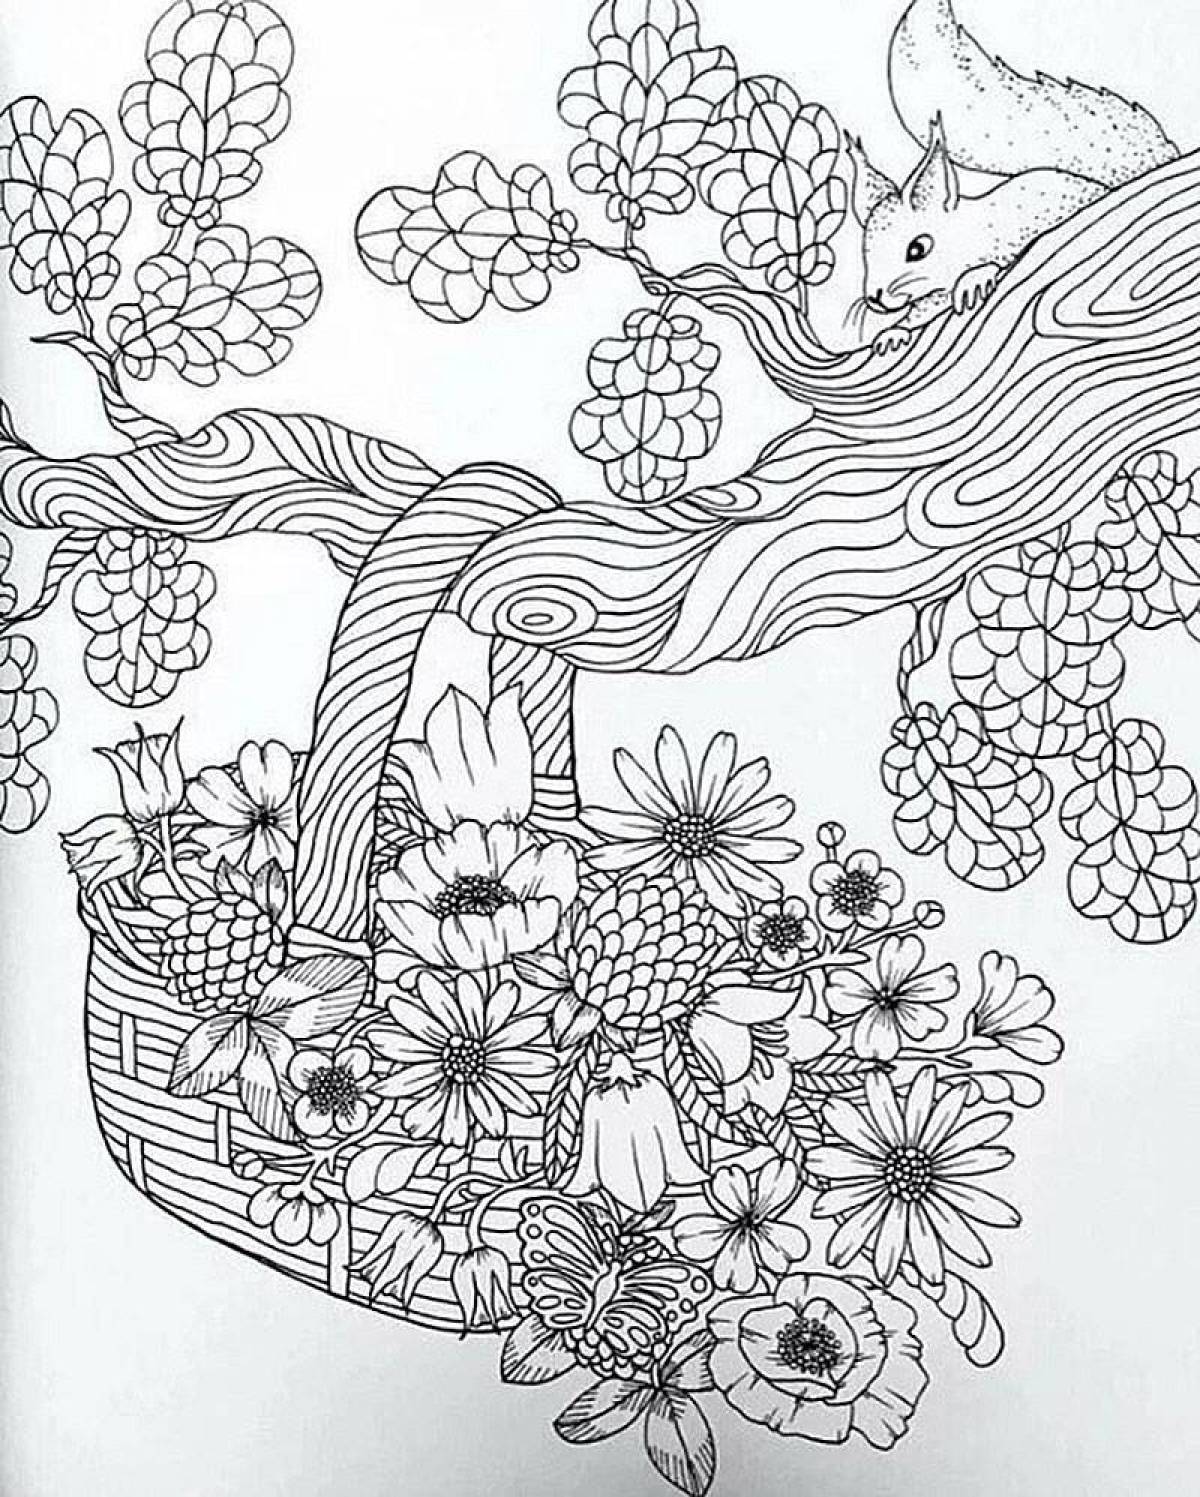 Dreamy coloring book for adults